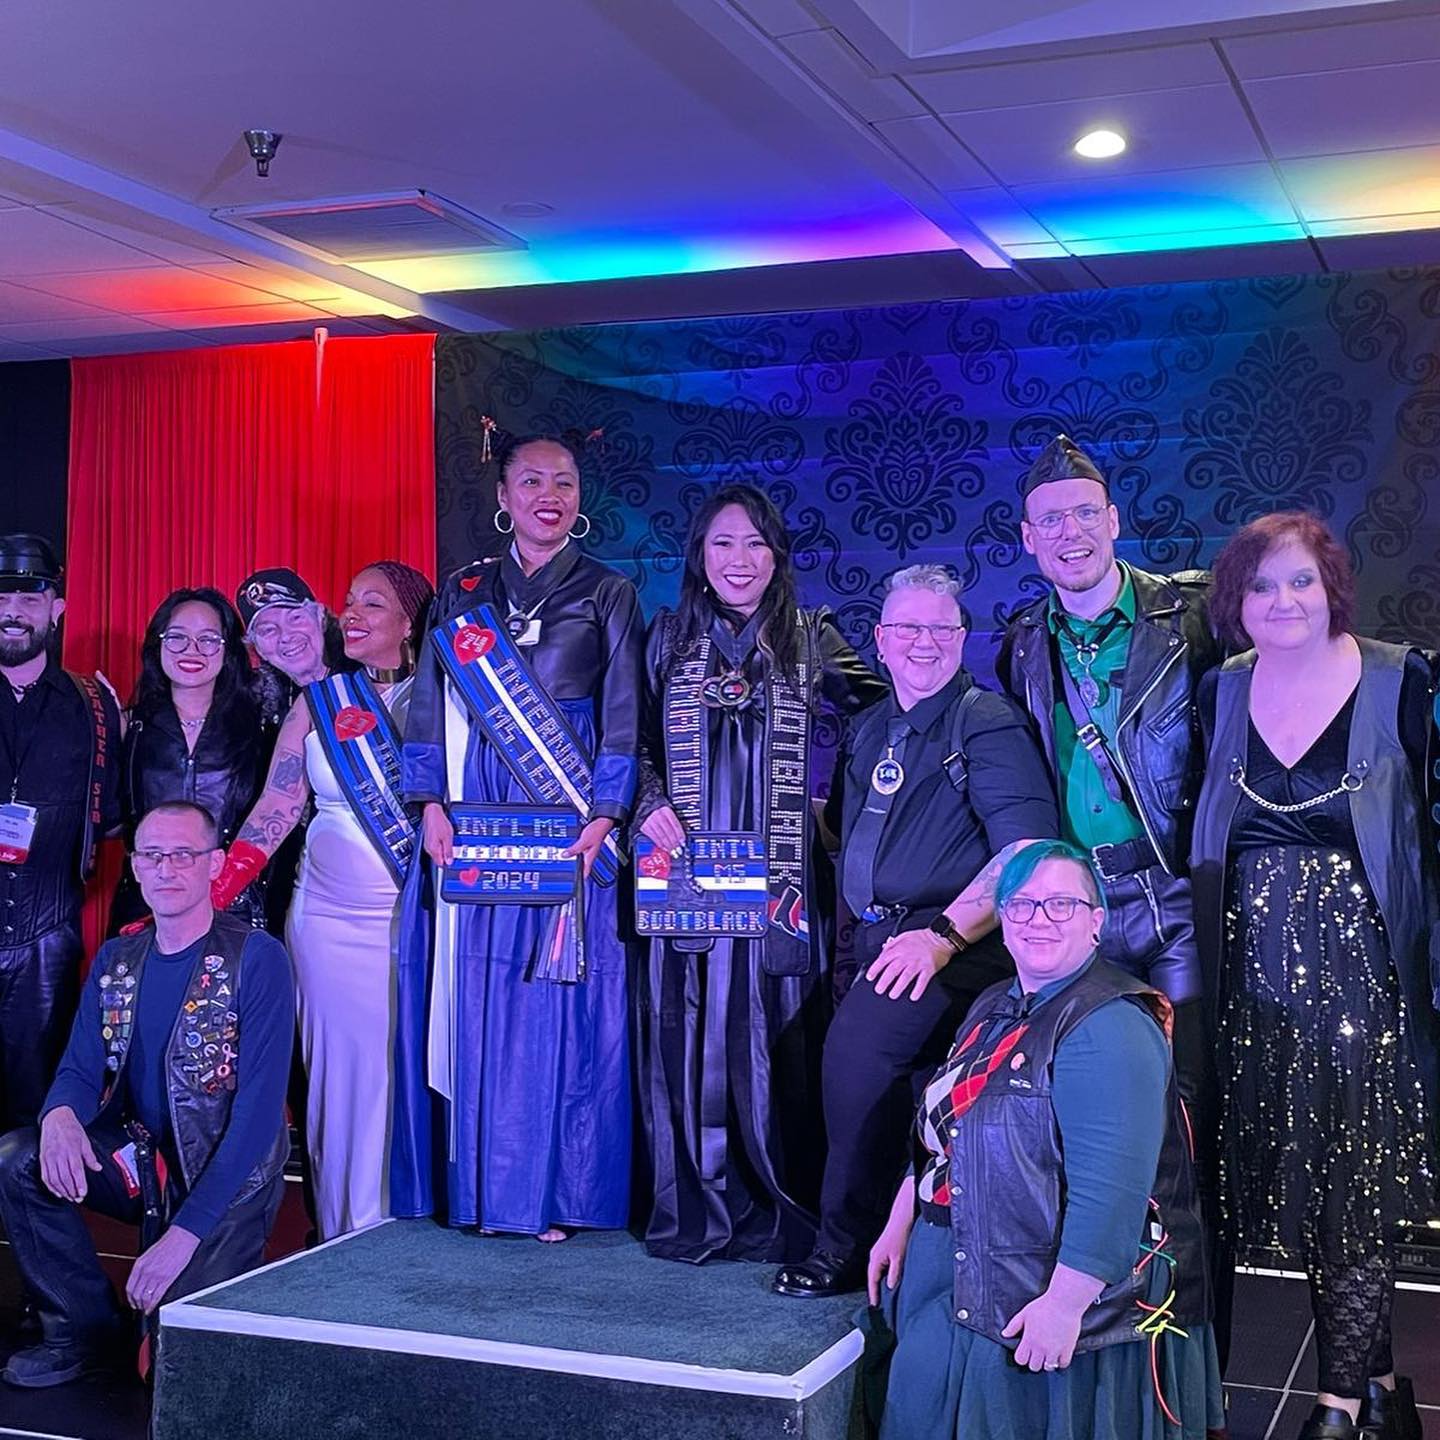 @international.mslbb highlight reel!
❤️💙🖤This was an incredibly significant IMsLBB to me; this year I was offered the honor of judging, and this year the two title winners @theleathergoddess and @spank.cake are both Leatherwomen of Asian descent, the first time this has ever occurred. This is a historical moment for Asian/POC leatherfolk everywhere, and I wept to see both of them rightfully mantled.  Congratulations to our new titleholders and to leather community; it has been my privilege to be of service to the title as a judge. 
I also got to facilitate one of my best friends first fisting experiences in a 6 person fisting train, watch @liv_lush in all of her top masochistic glory (congrats, title holder!!) with @amalia.valentine, piss in a hole, whip to my hearts content, organize the aftercare suite with @kinkoutevents and do and watch so many other scenes that I can’t talk about on here ❤️‍🔥 I feel so full and empty at the same time 💙🖤❤️ I will live in this leather forever